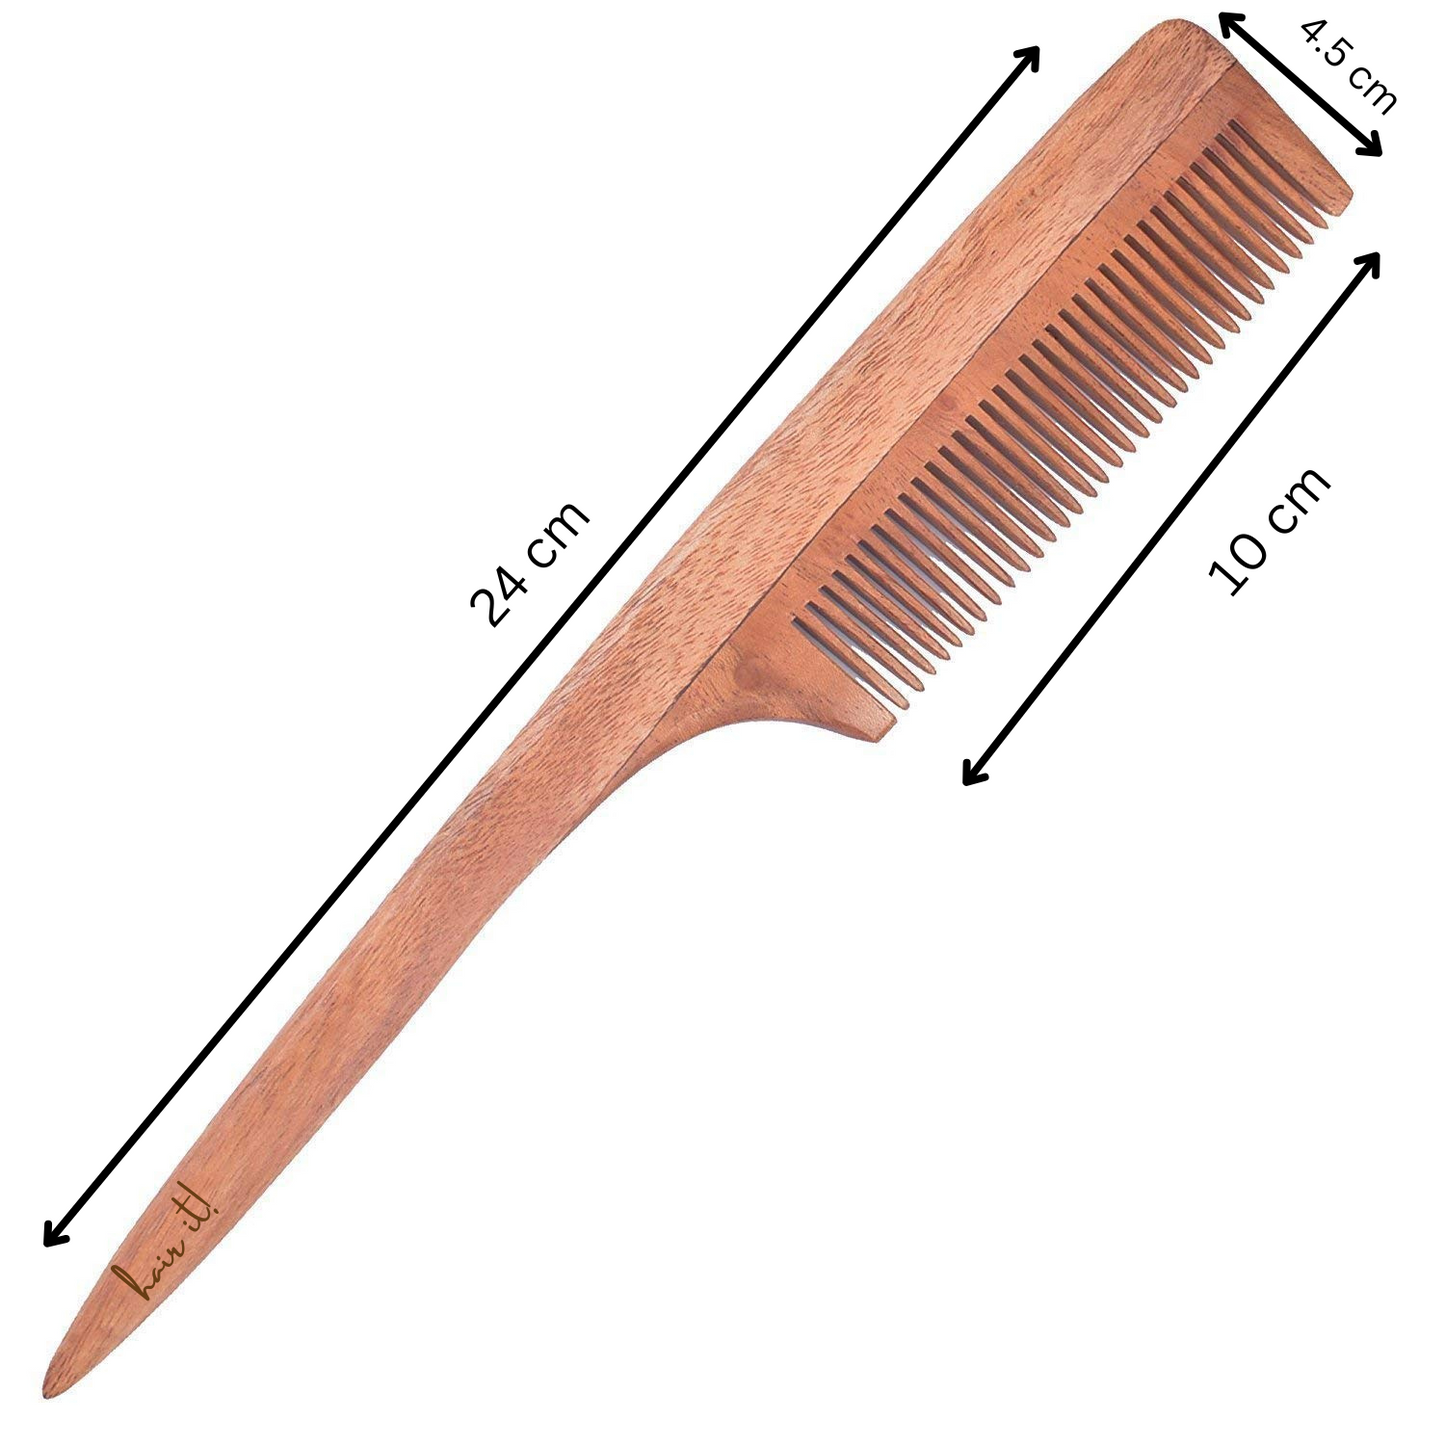 Neem Wooden Comb | Hair Growth, Hairfall, Dandruff Control | Hair Straightening, Frizz Control | Comb for Men, Women - Fine Partition Comb